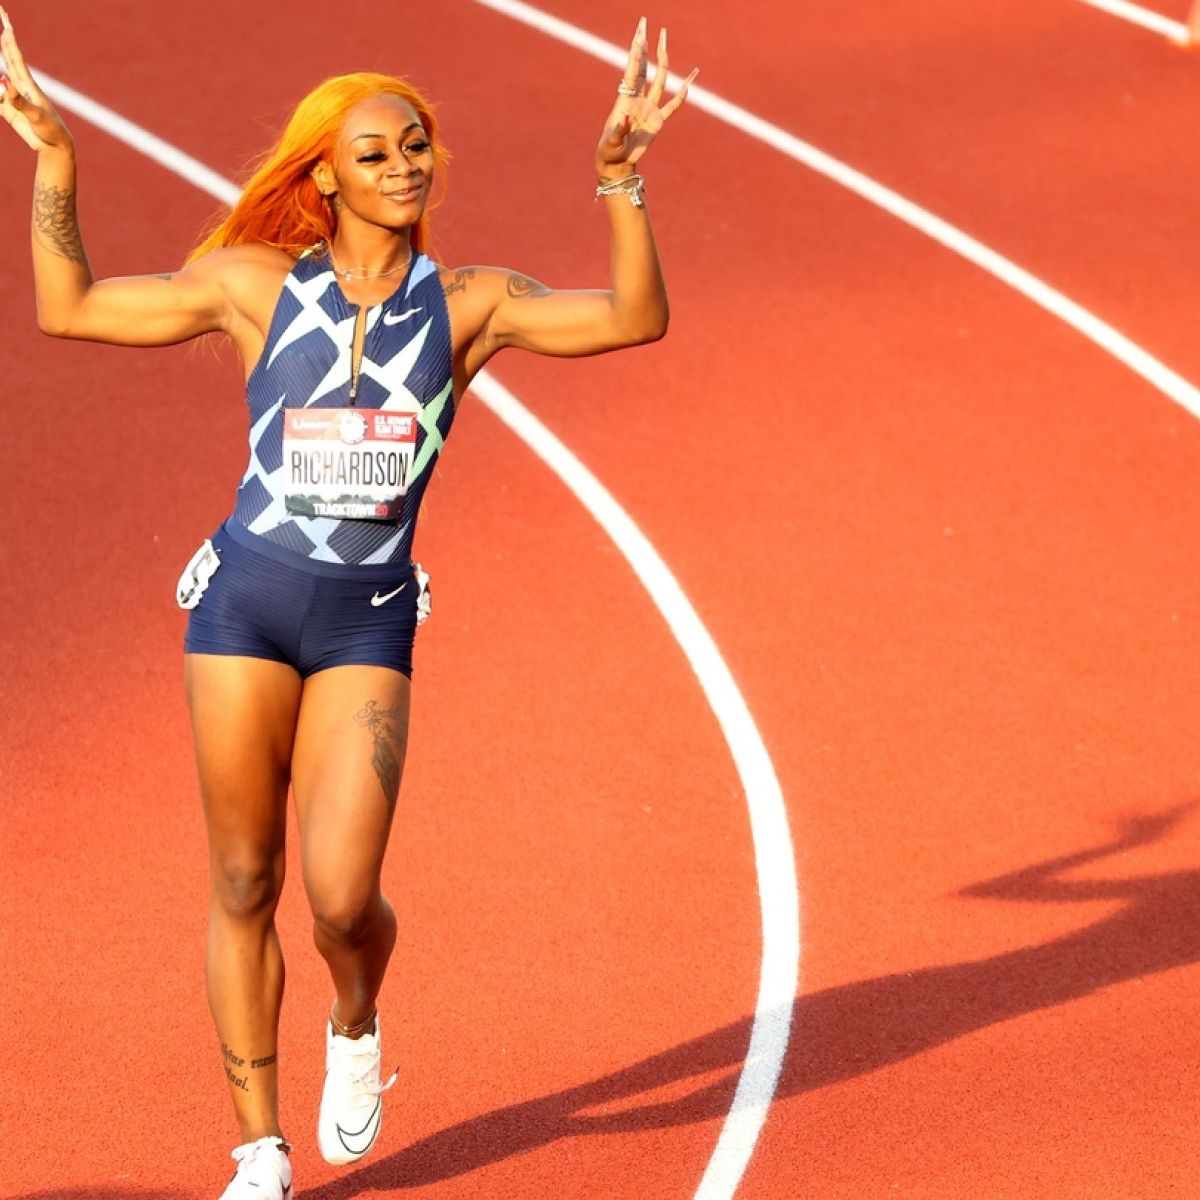 Sha'Carri Richardson's image sullied by doping shadow of Dennis Mitchell